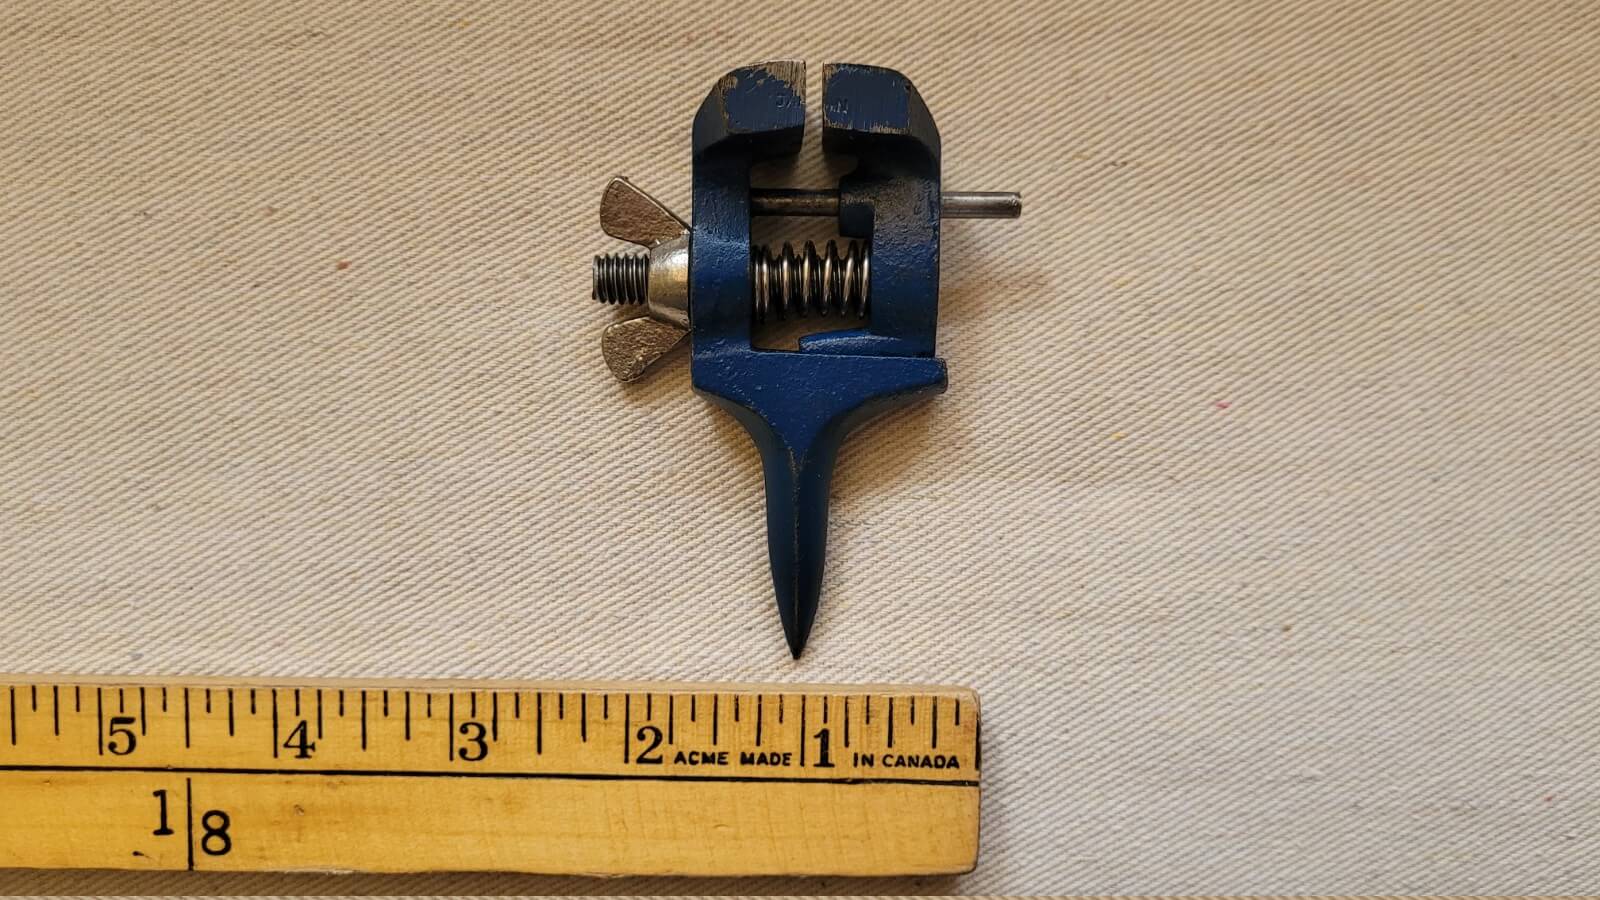 Miniature Vintage Cast Post Vice with Spike 1 1/4" Jaws